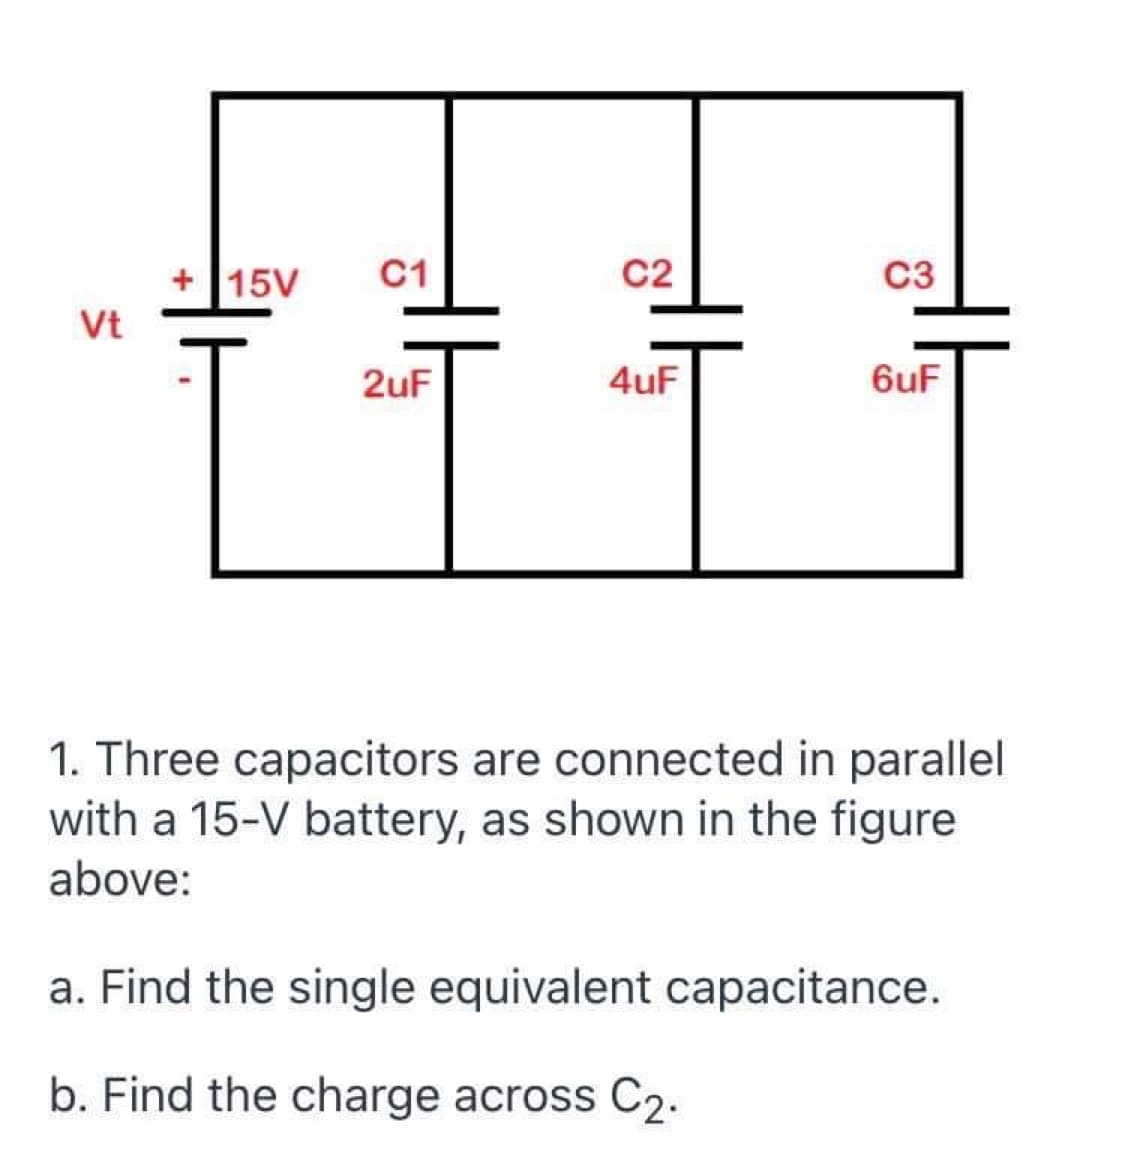 + 15V
C1
C2
C3
Vt
2uF
4uF
6uF
1. Three capacitors are connected in parallel
with a 15-V battery, as shown in the figure
above:
a. Find the single equivalent capacitance.
b. Find the charge across C2.
